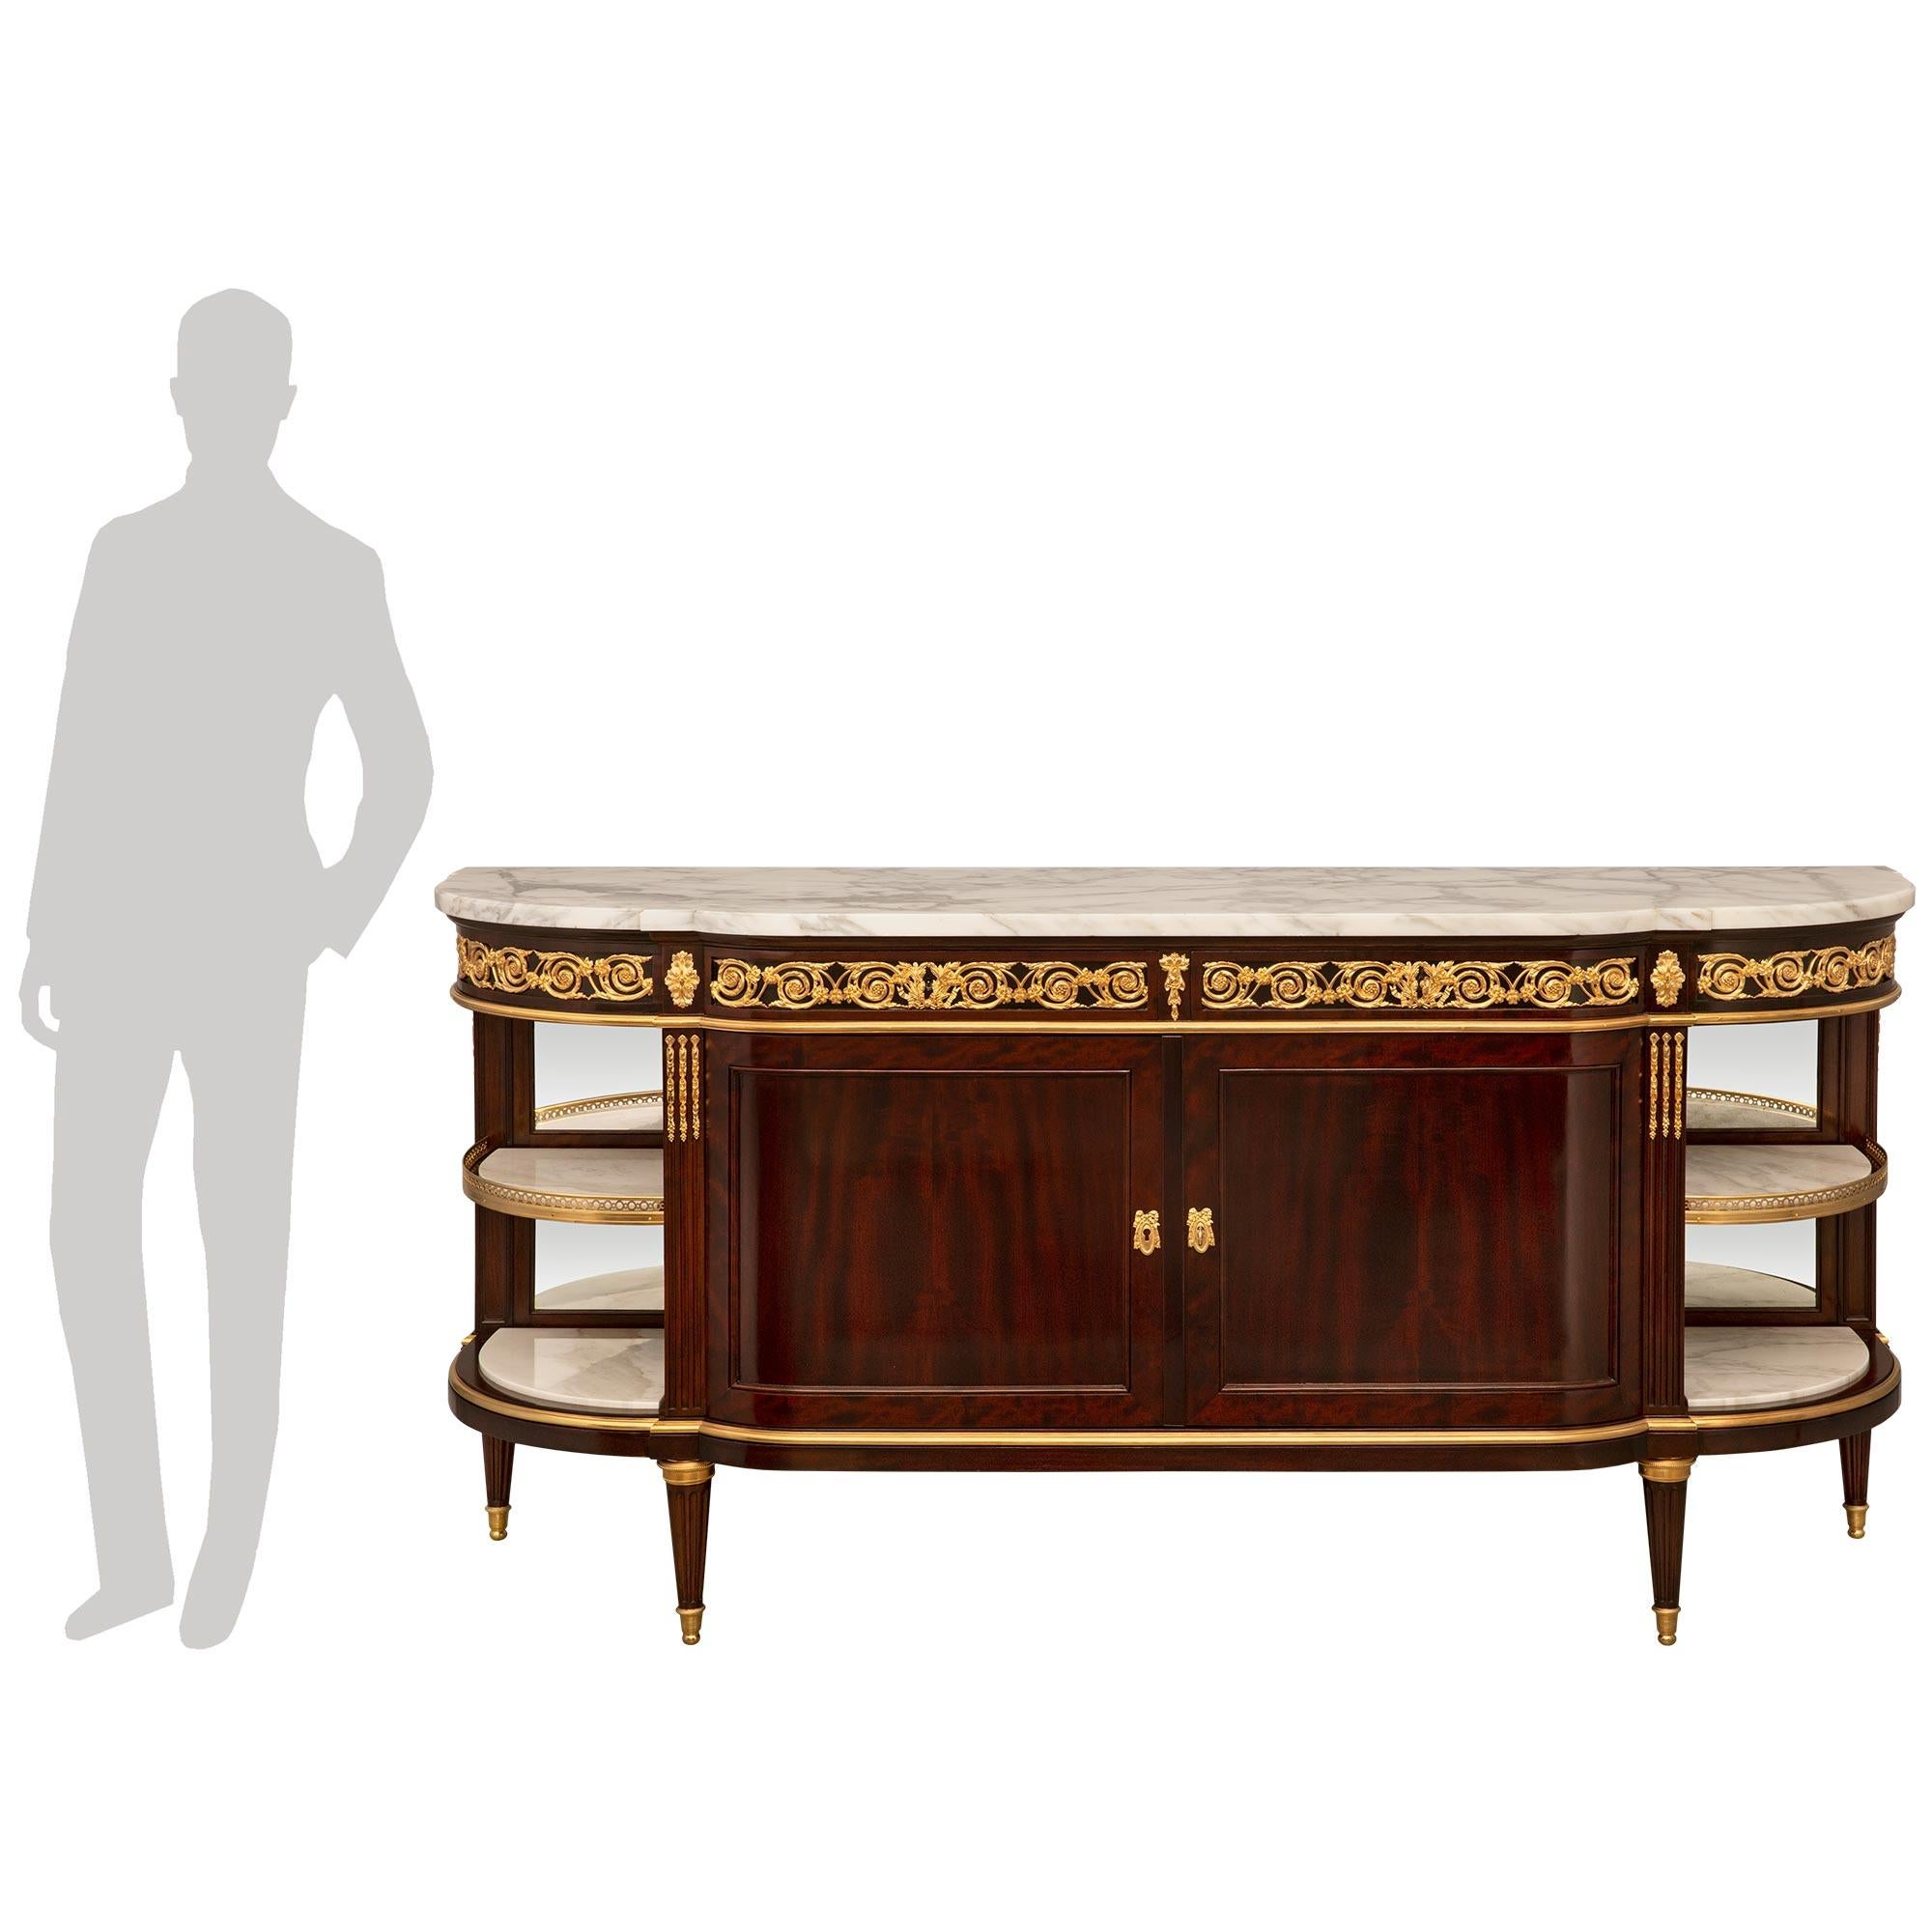 An exceptional and very high quality French 19th century Louis XVI st. Belle Époque period Mahogany, ormolu and Arabescato marble buffet signed by Paul Sormani. The two door four drawer buffet is raised by elegant circular tapered fluted legs with